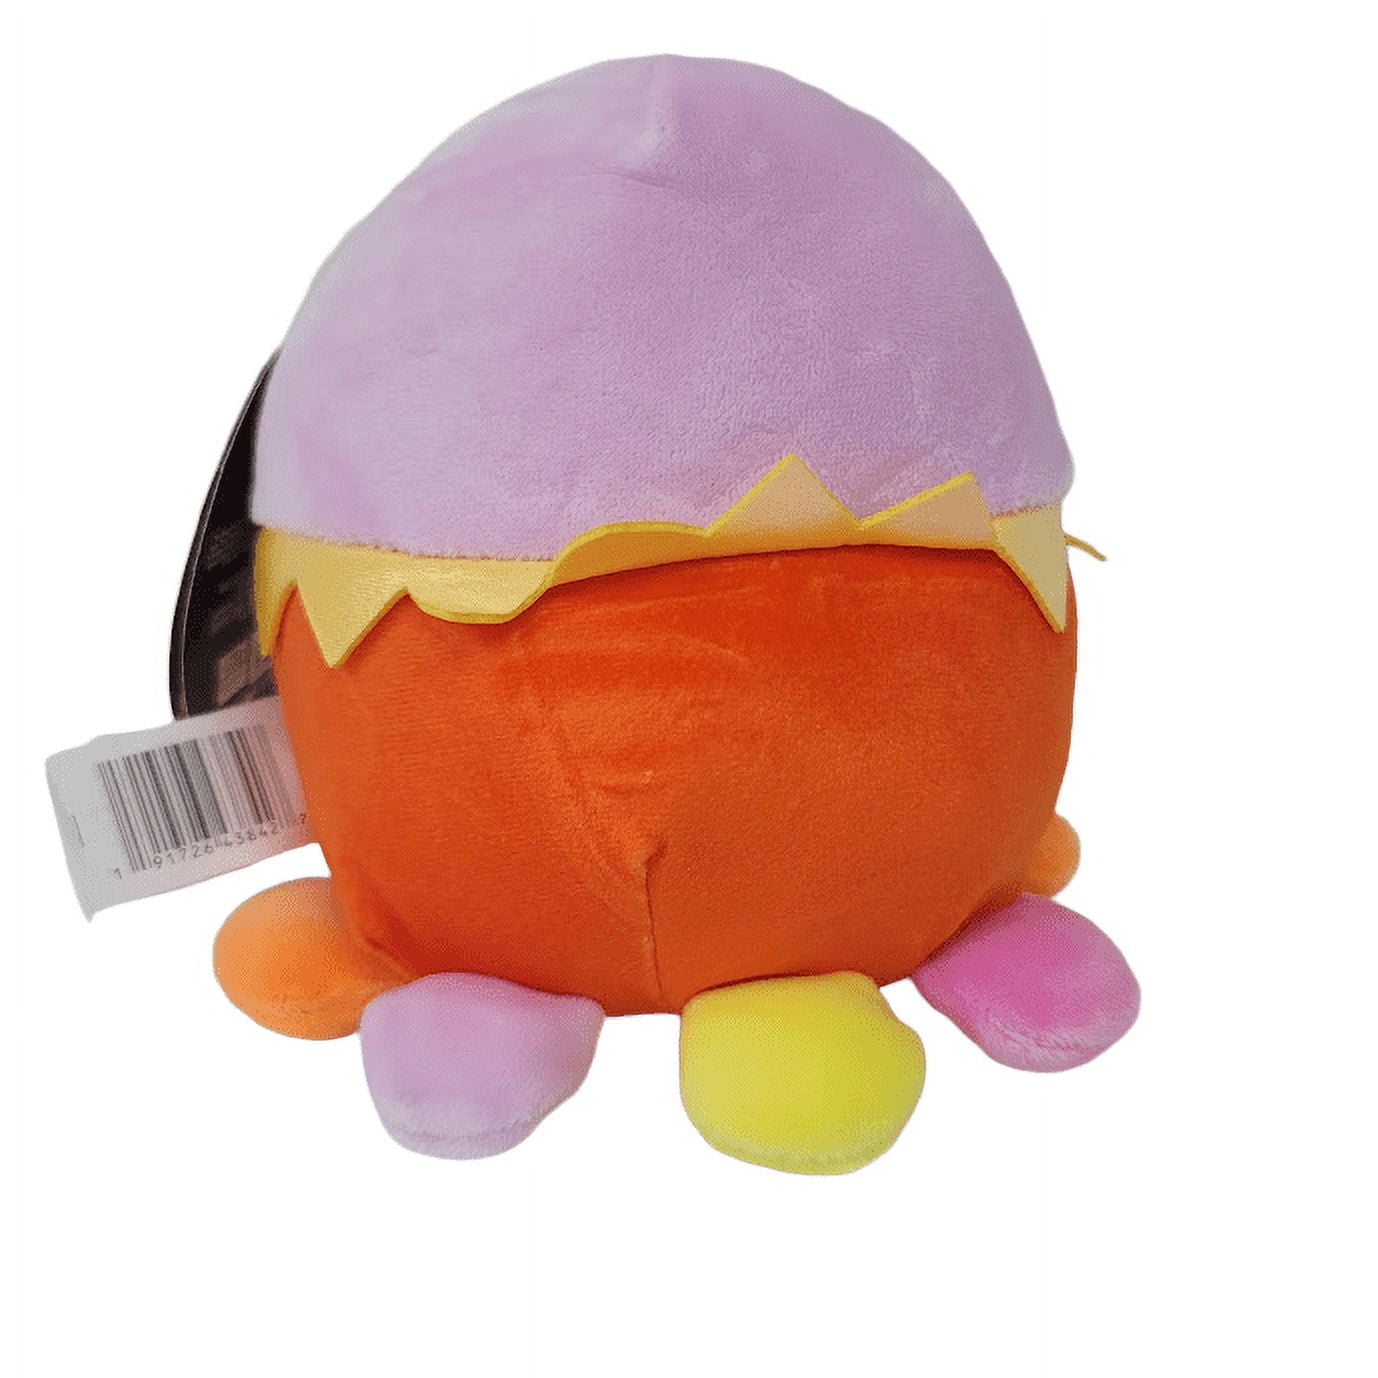 Squishmallows Official Kellytoys Plush 5 Inch Jeanne the Reese's Octopus  Valentines Day Edition Ultimate Soft Stuffed Toy 